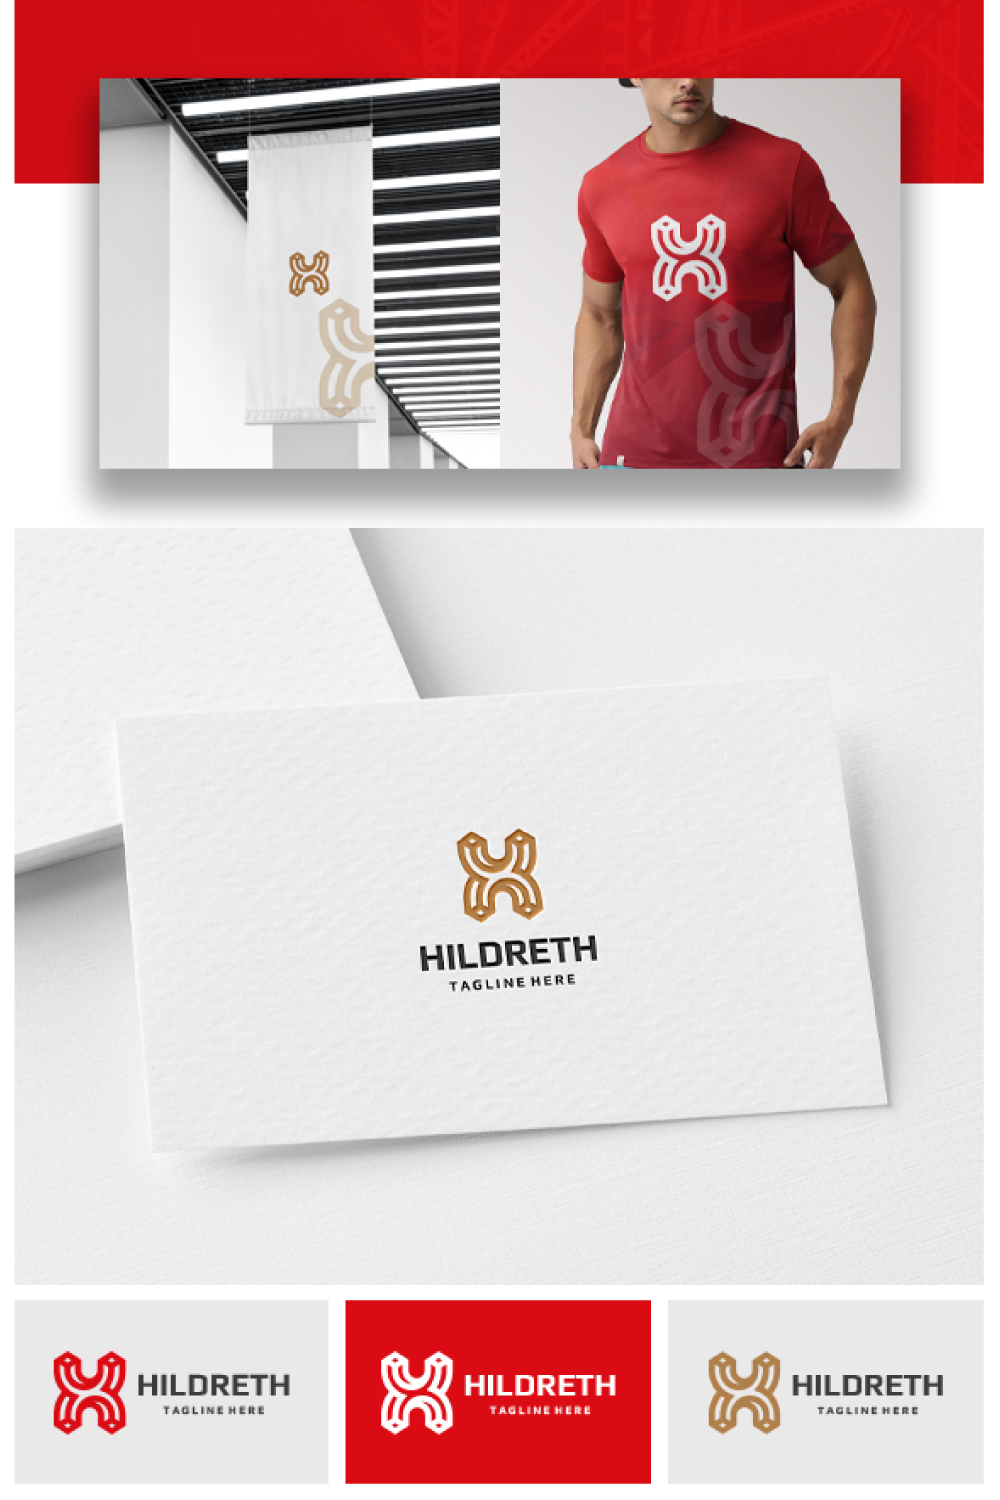 White and red business card with a man in a red shirt.